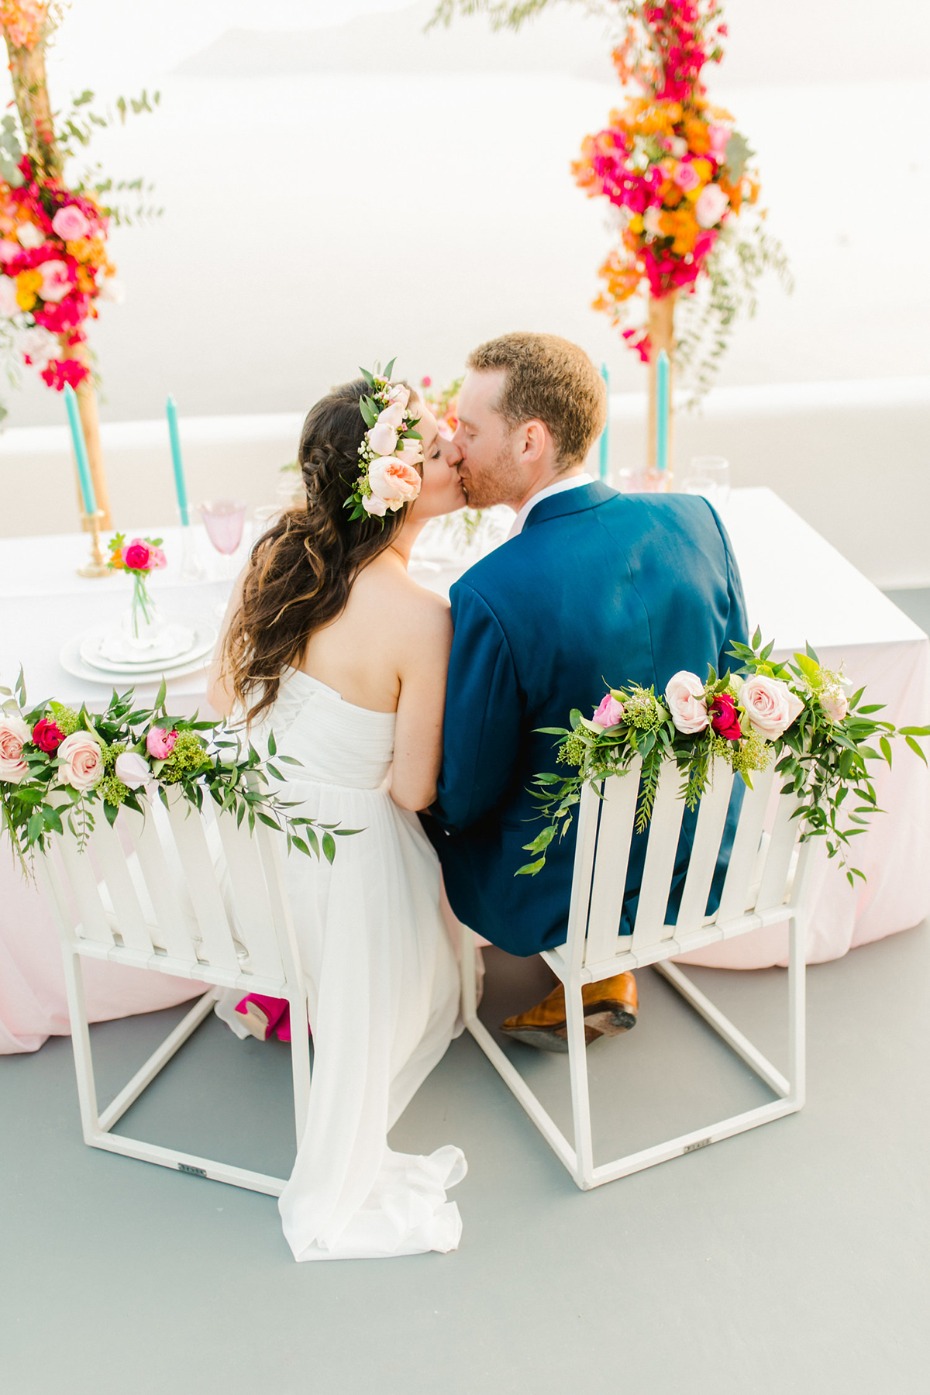 wedding kiss and flower seat accents